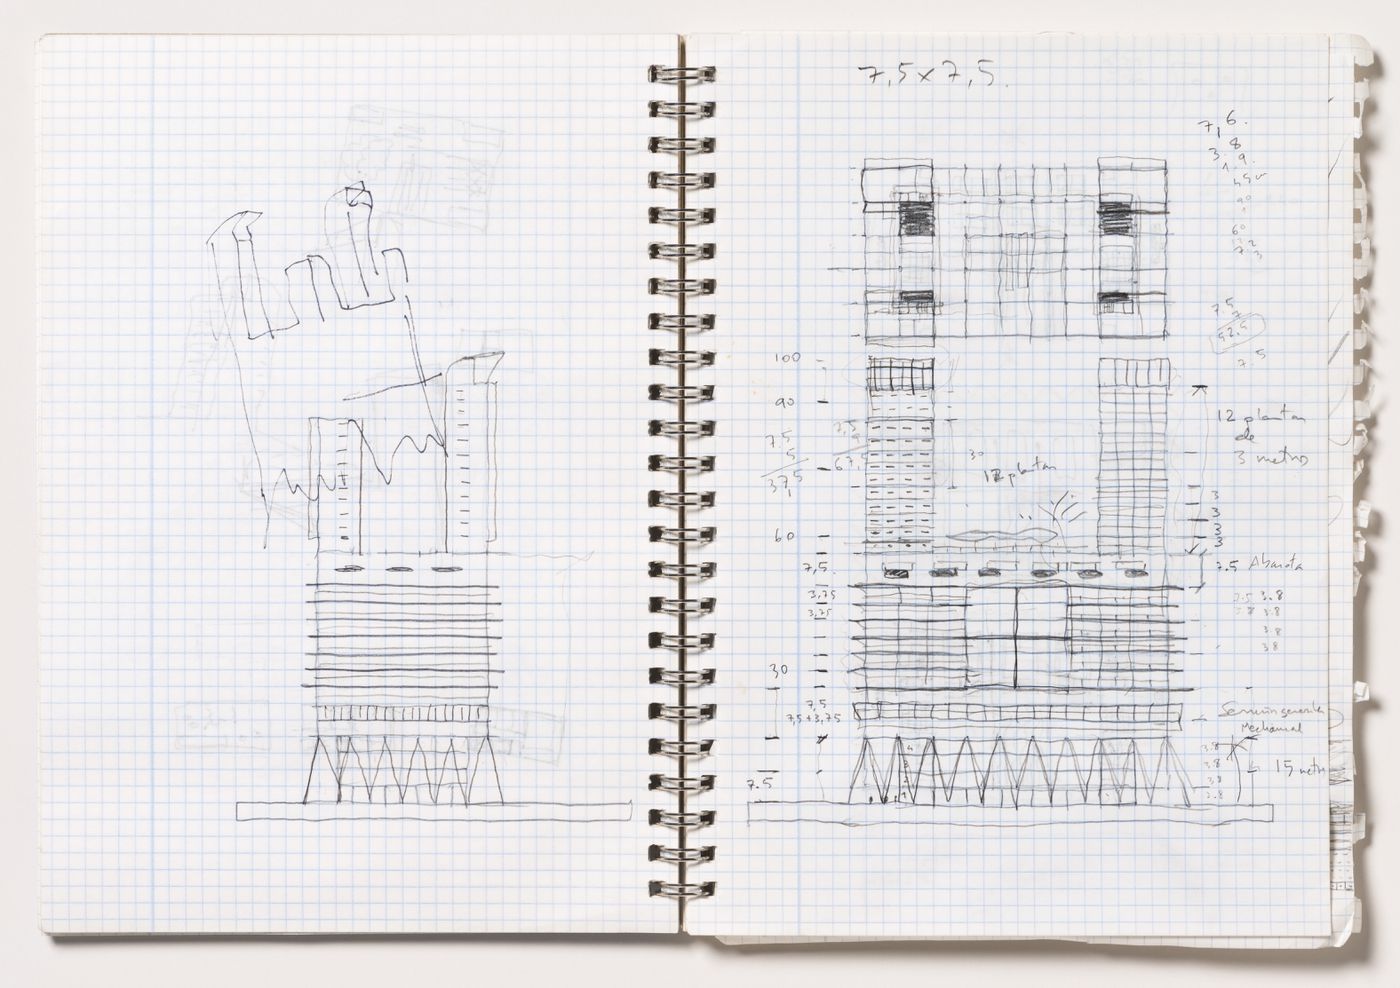 View of a sketchbook showing iterations of double tower, Puerto Málaga, Spain
